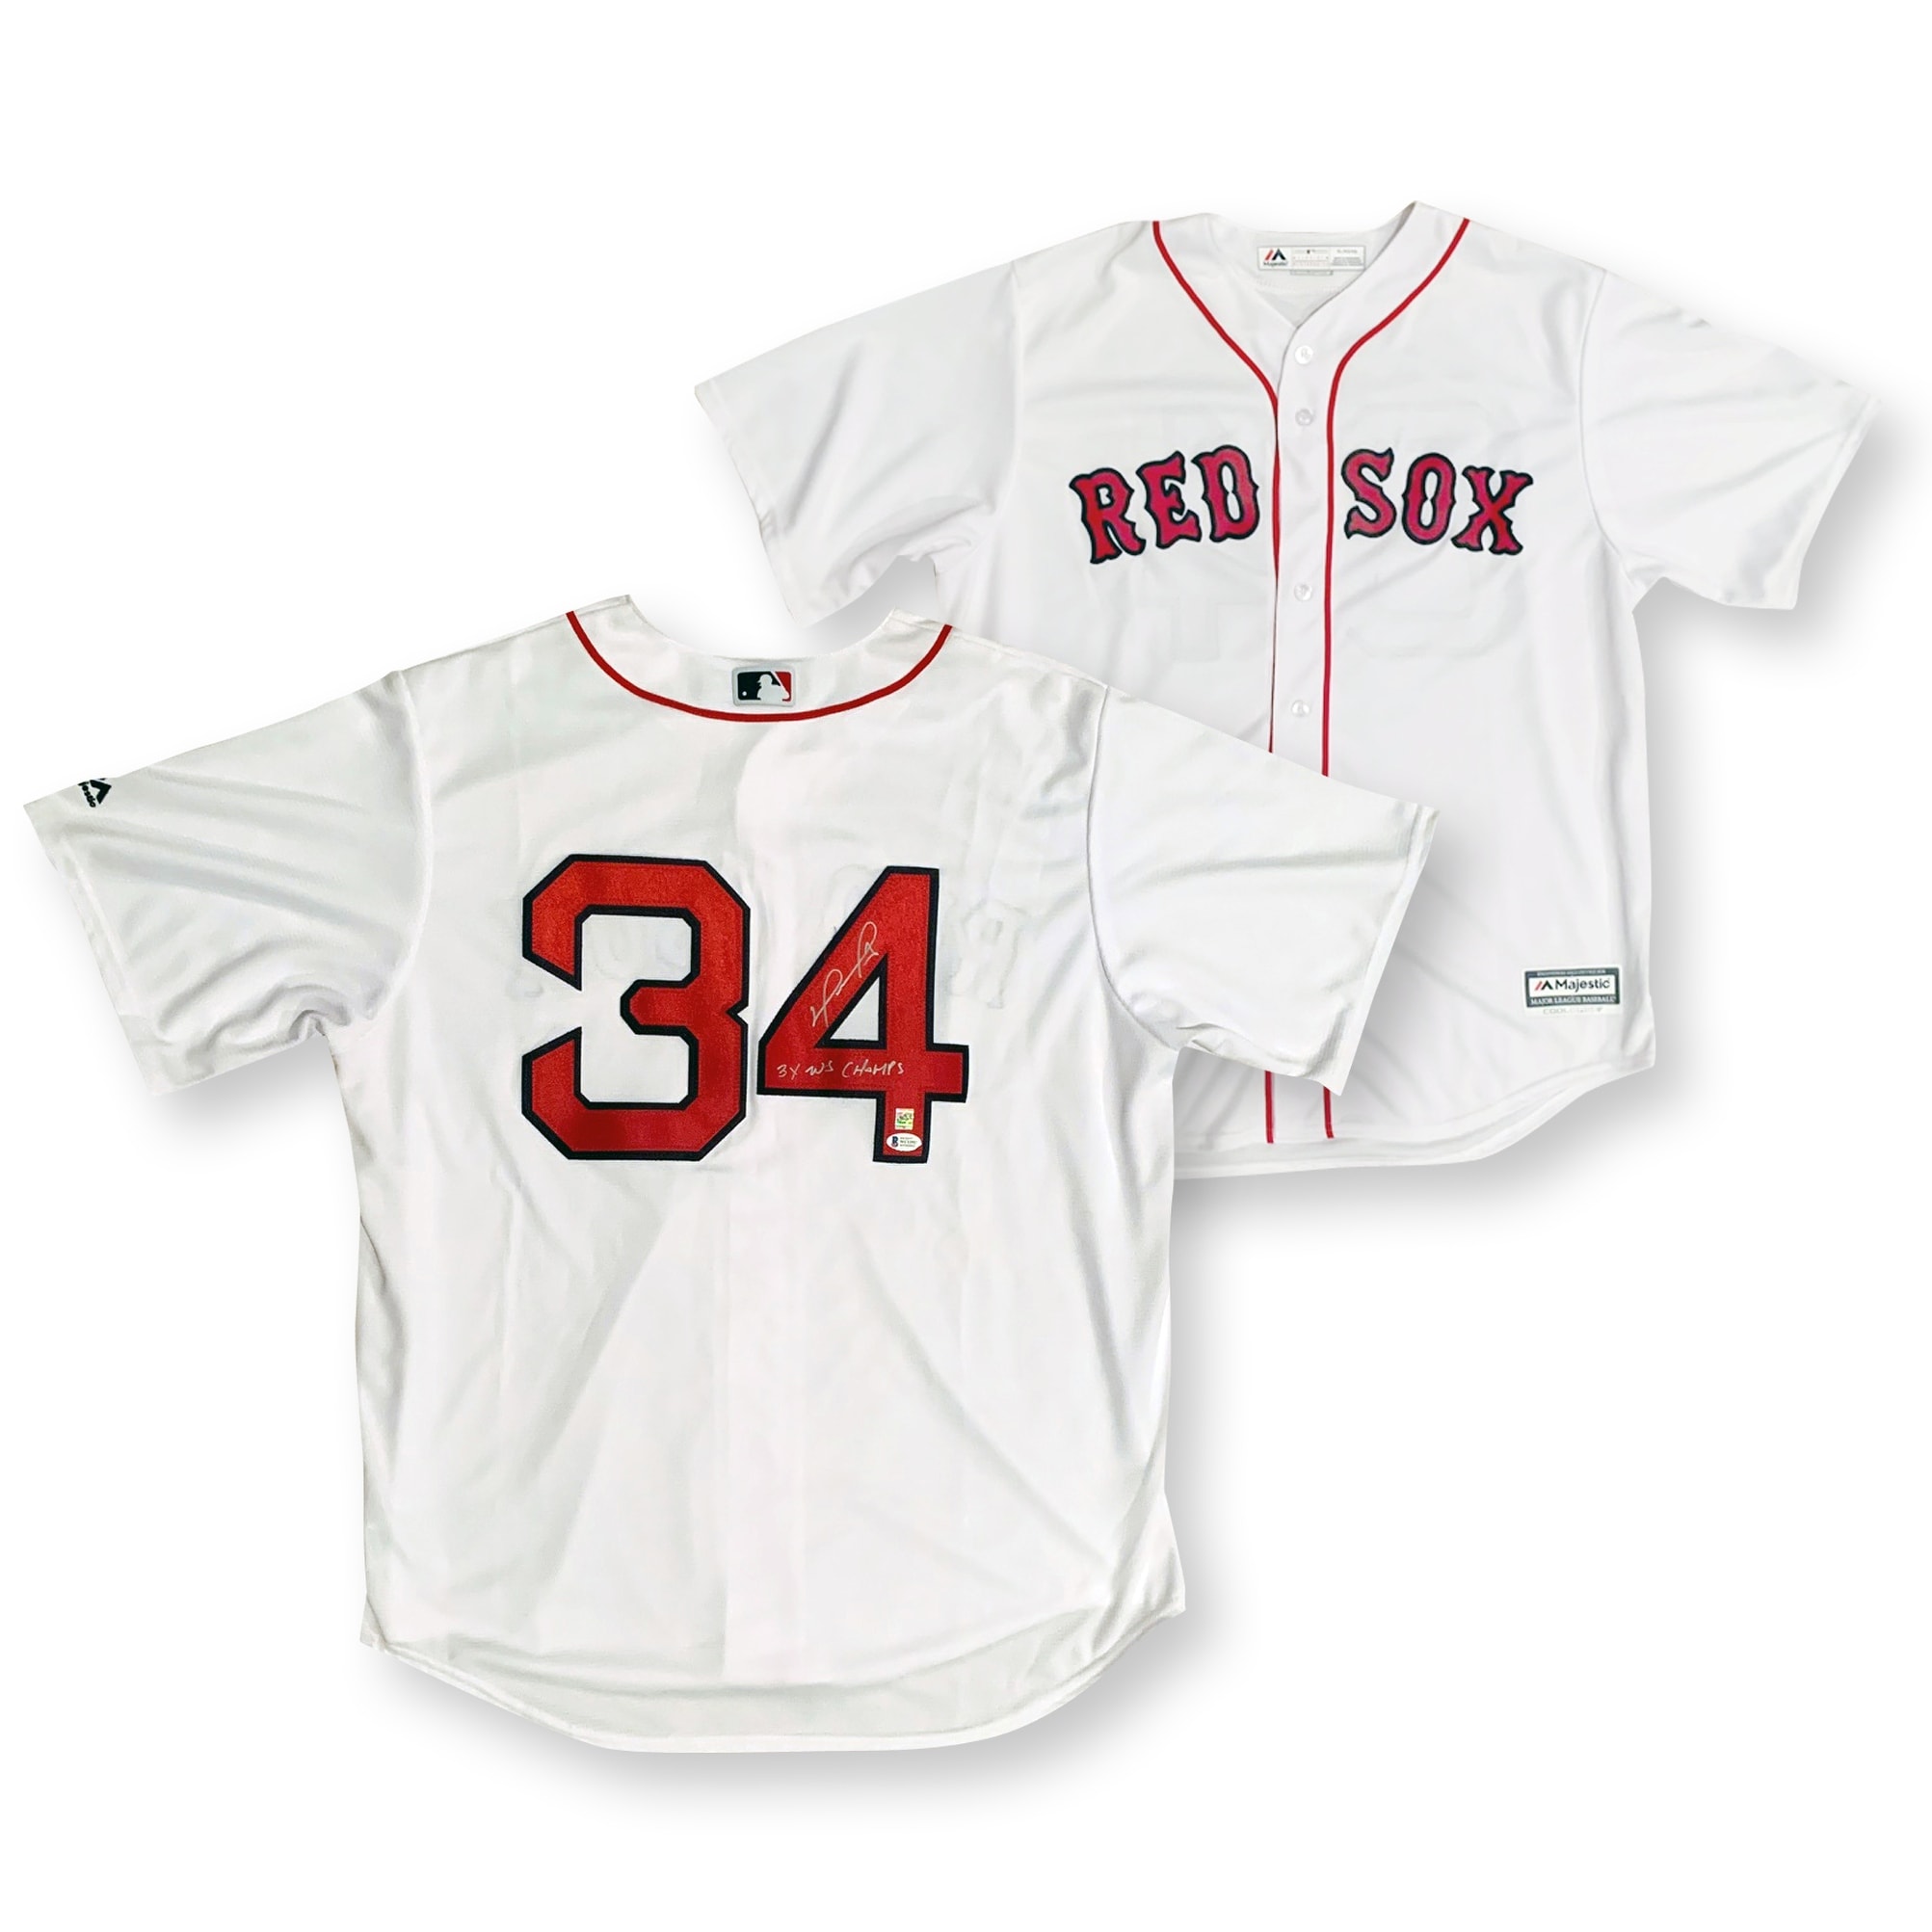 red sox jersey world series